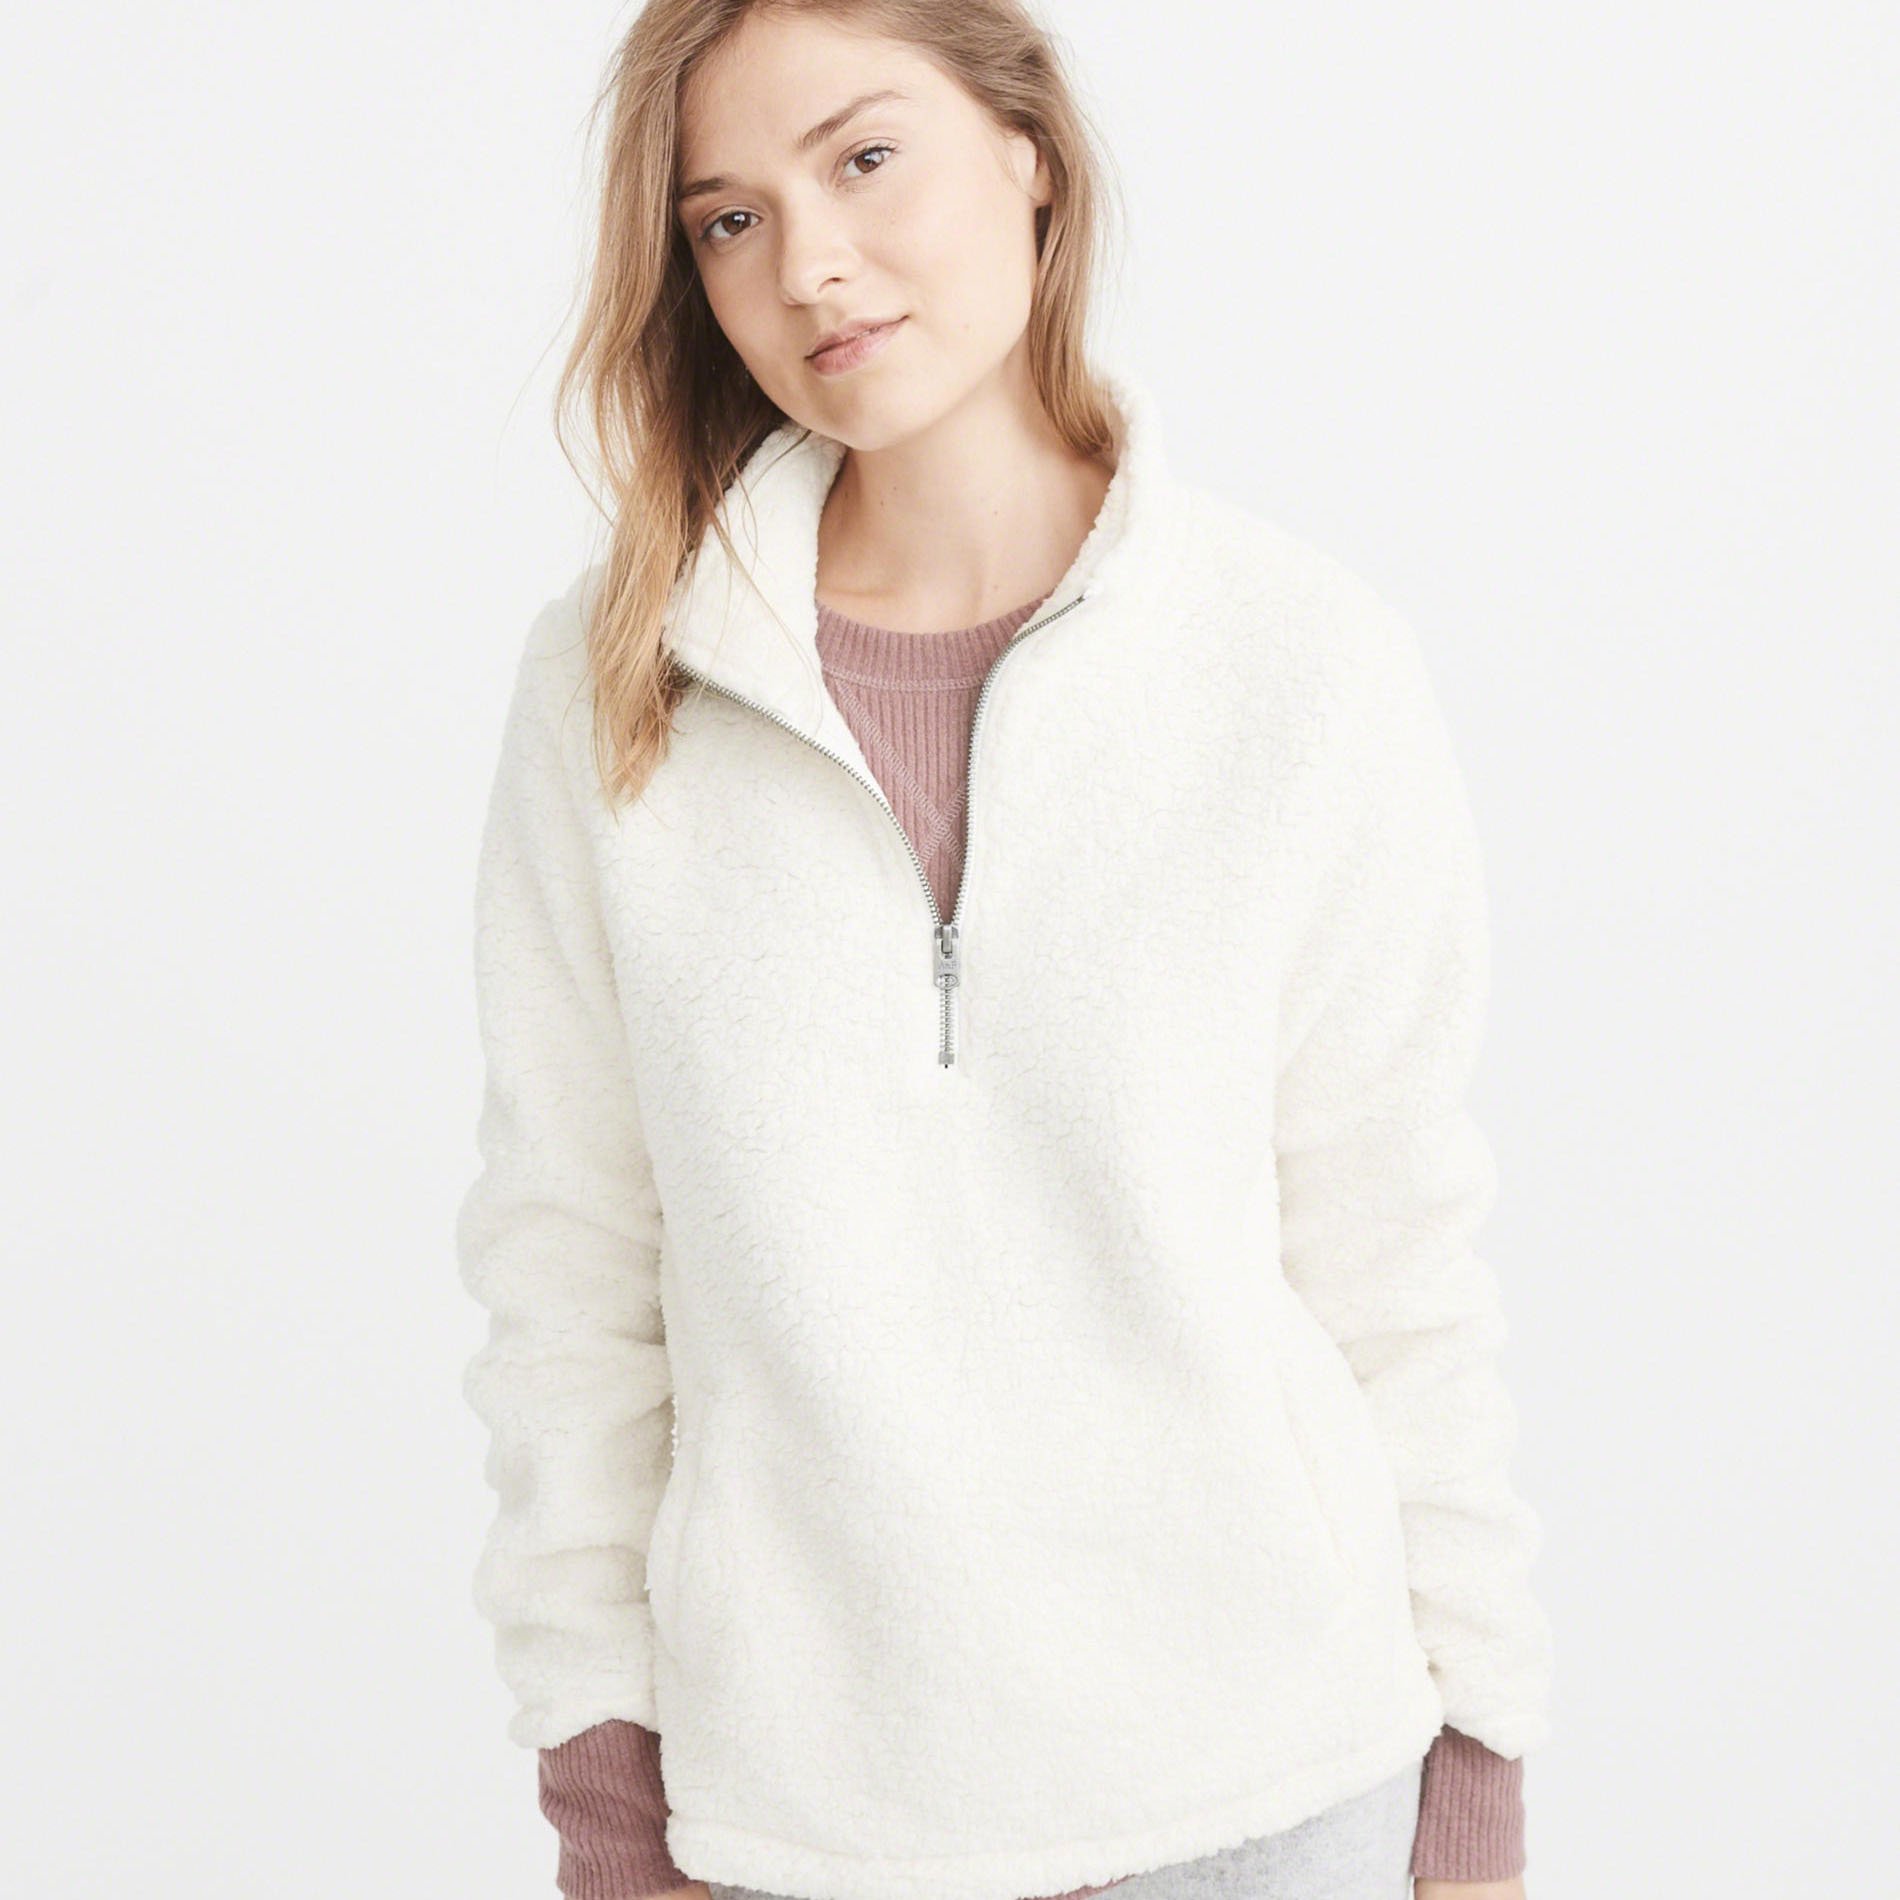 Abercrombie & Fitch sherpa pullover